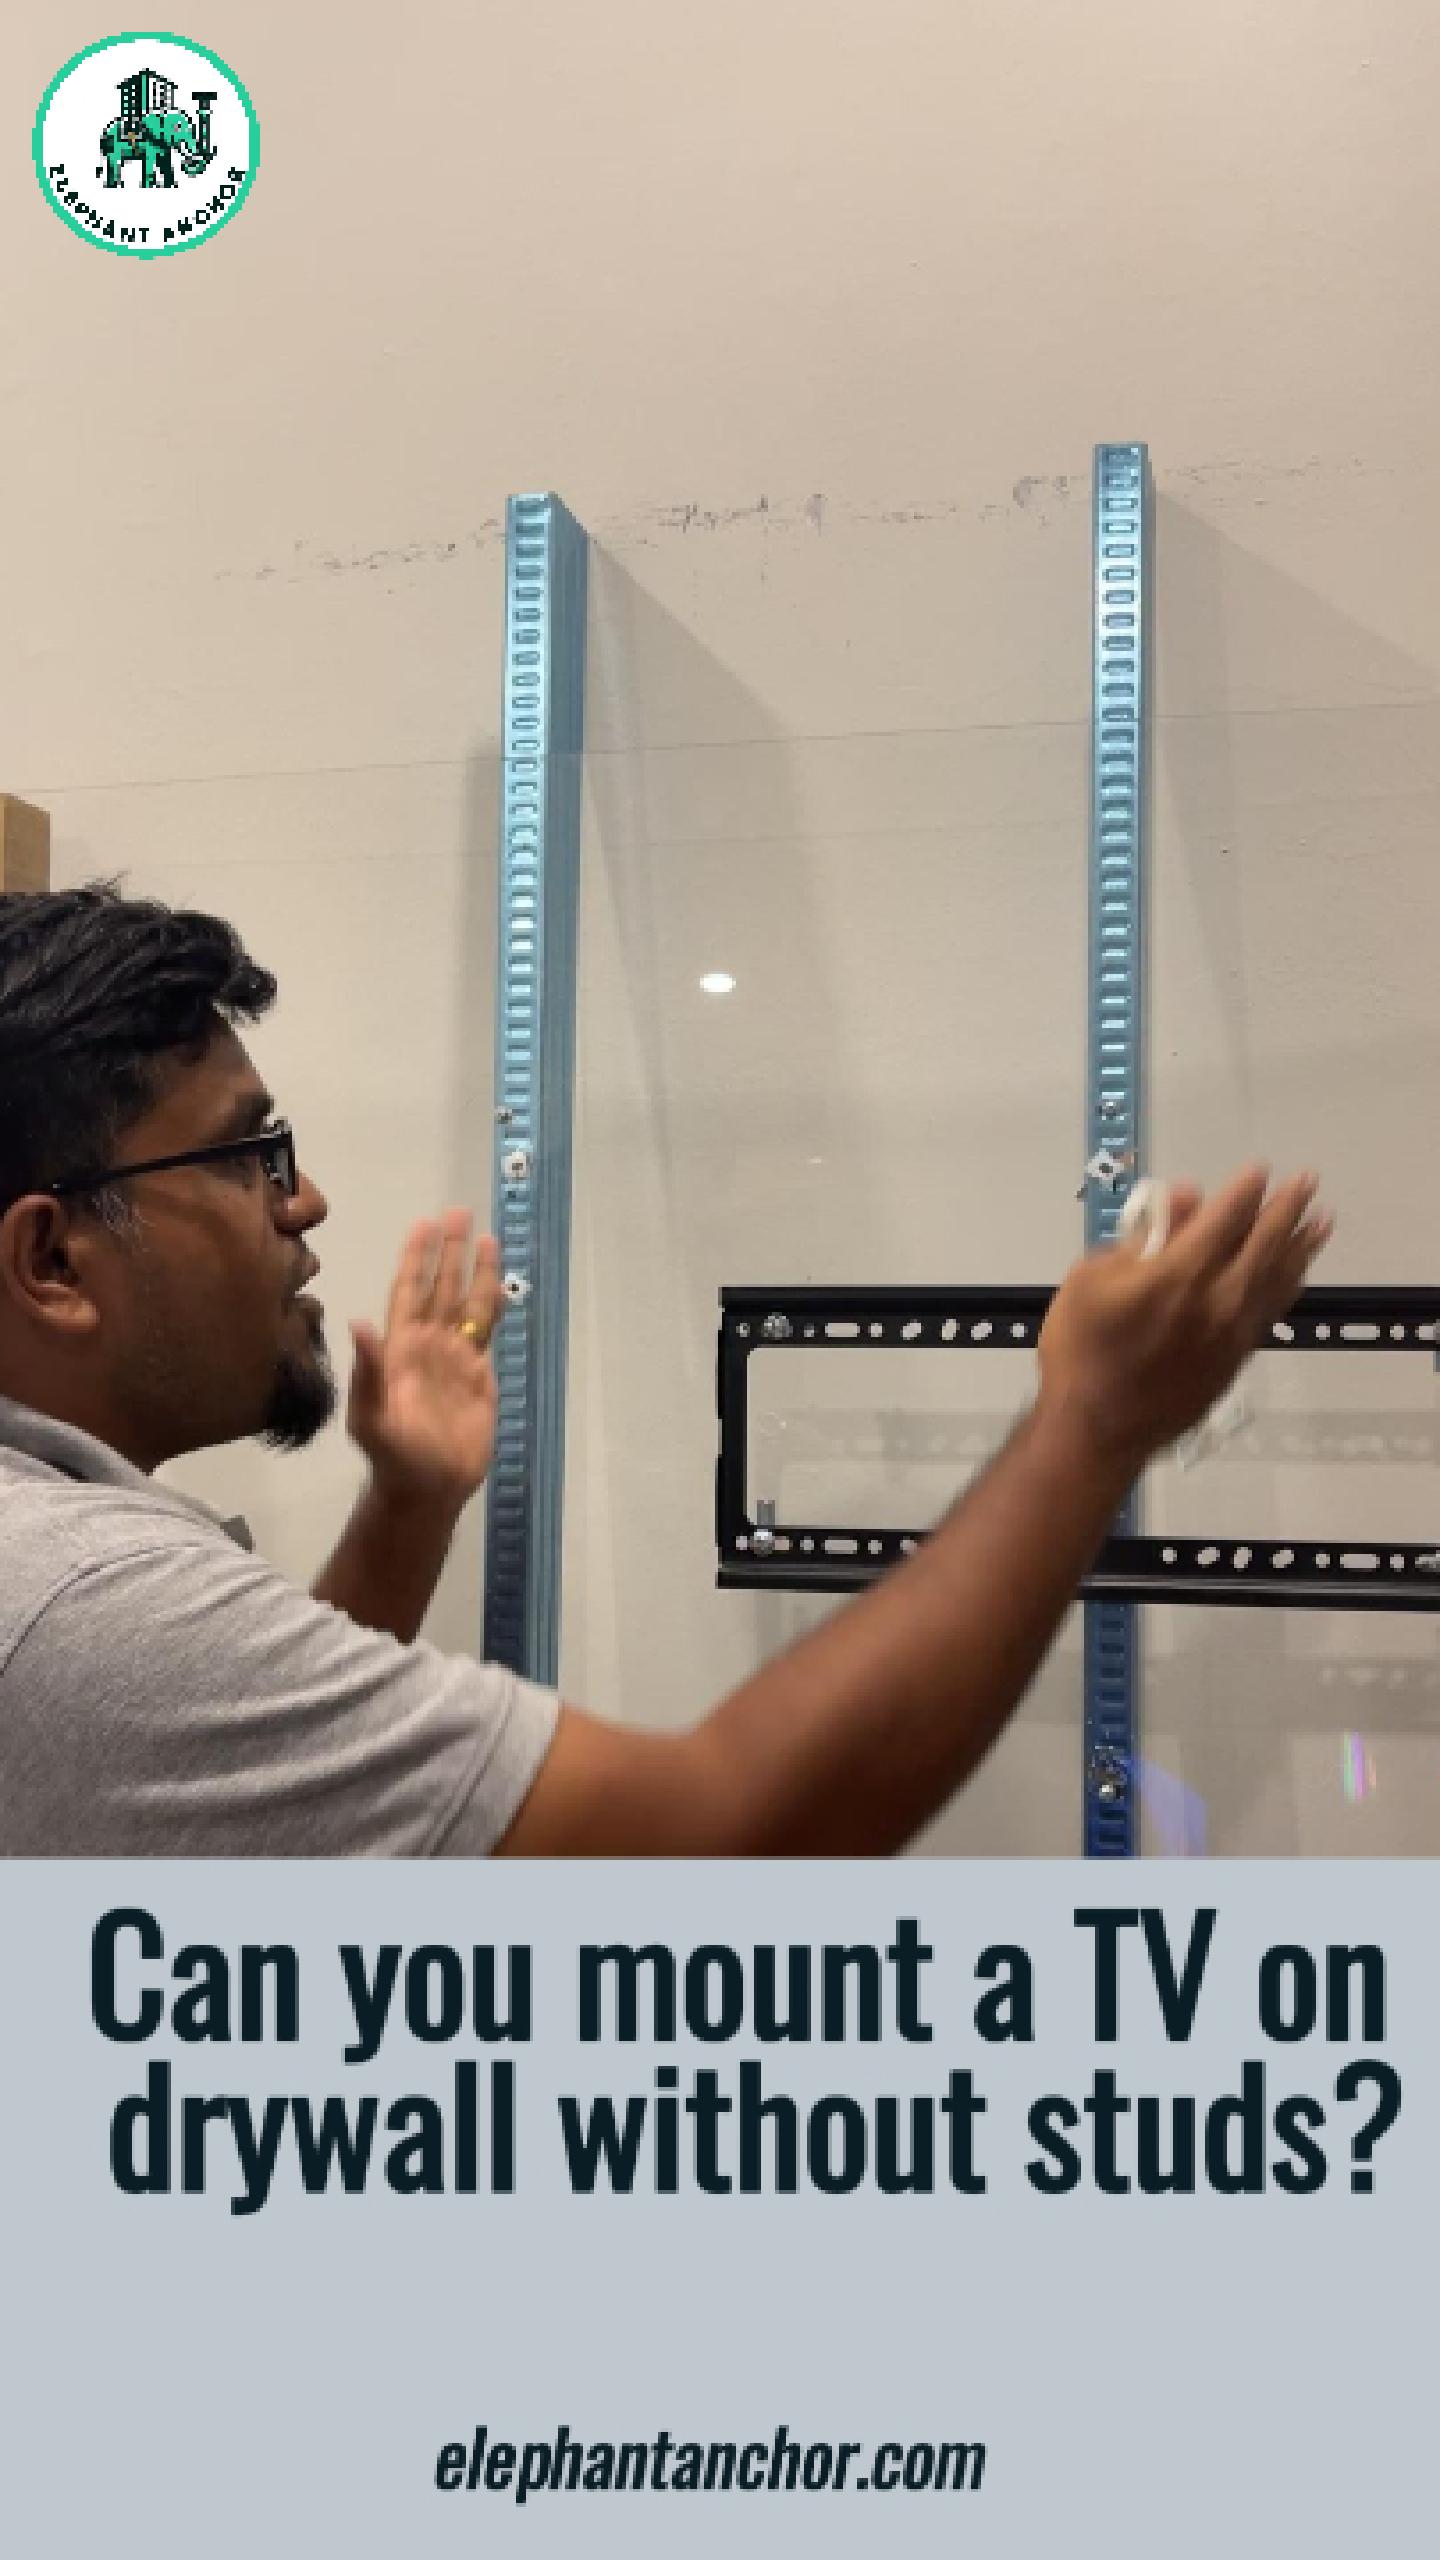 Can you mount a TV on drywall without studs?